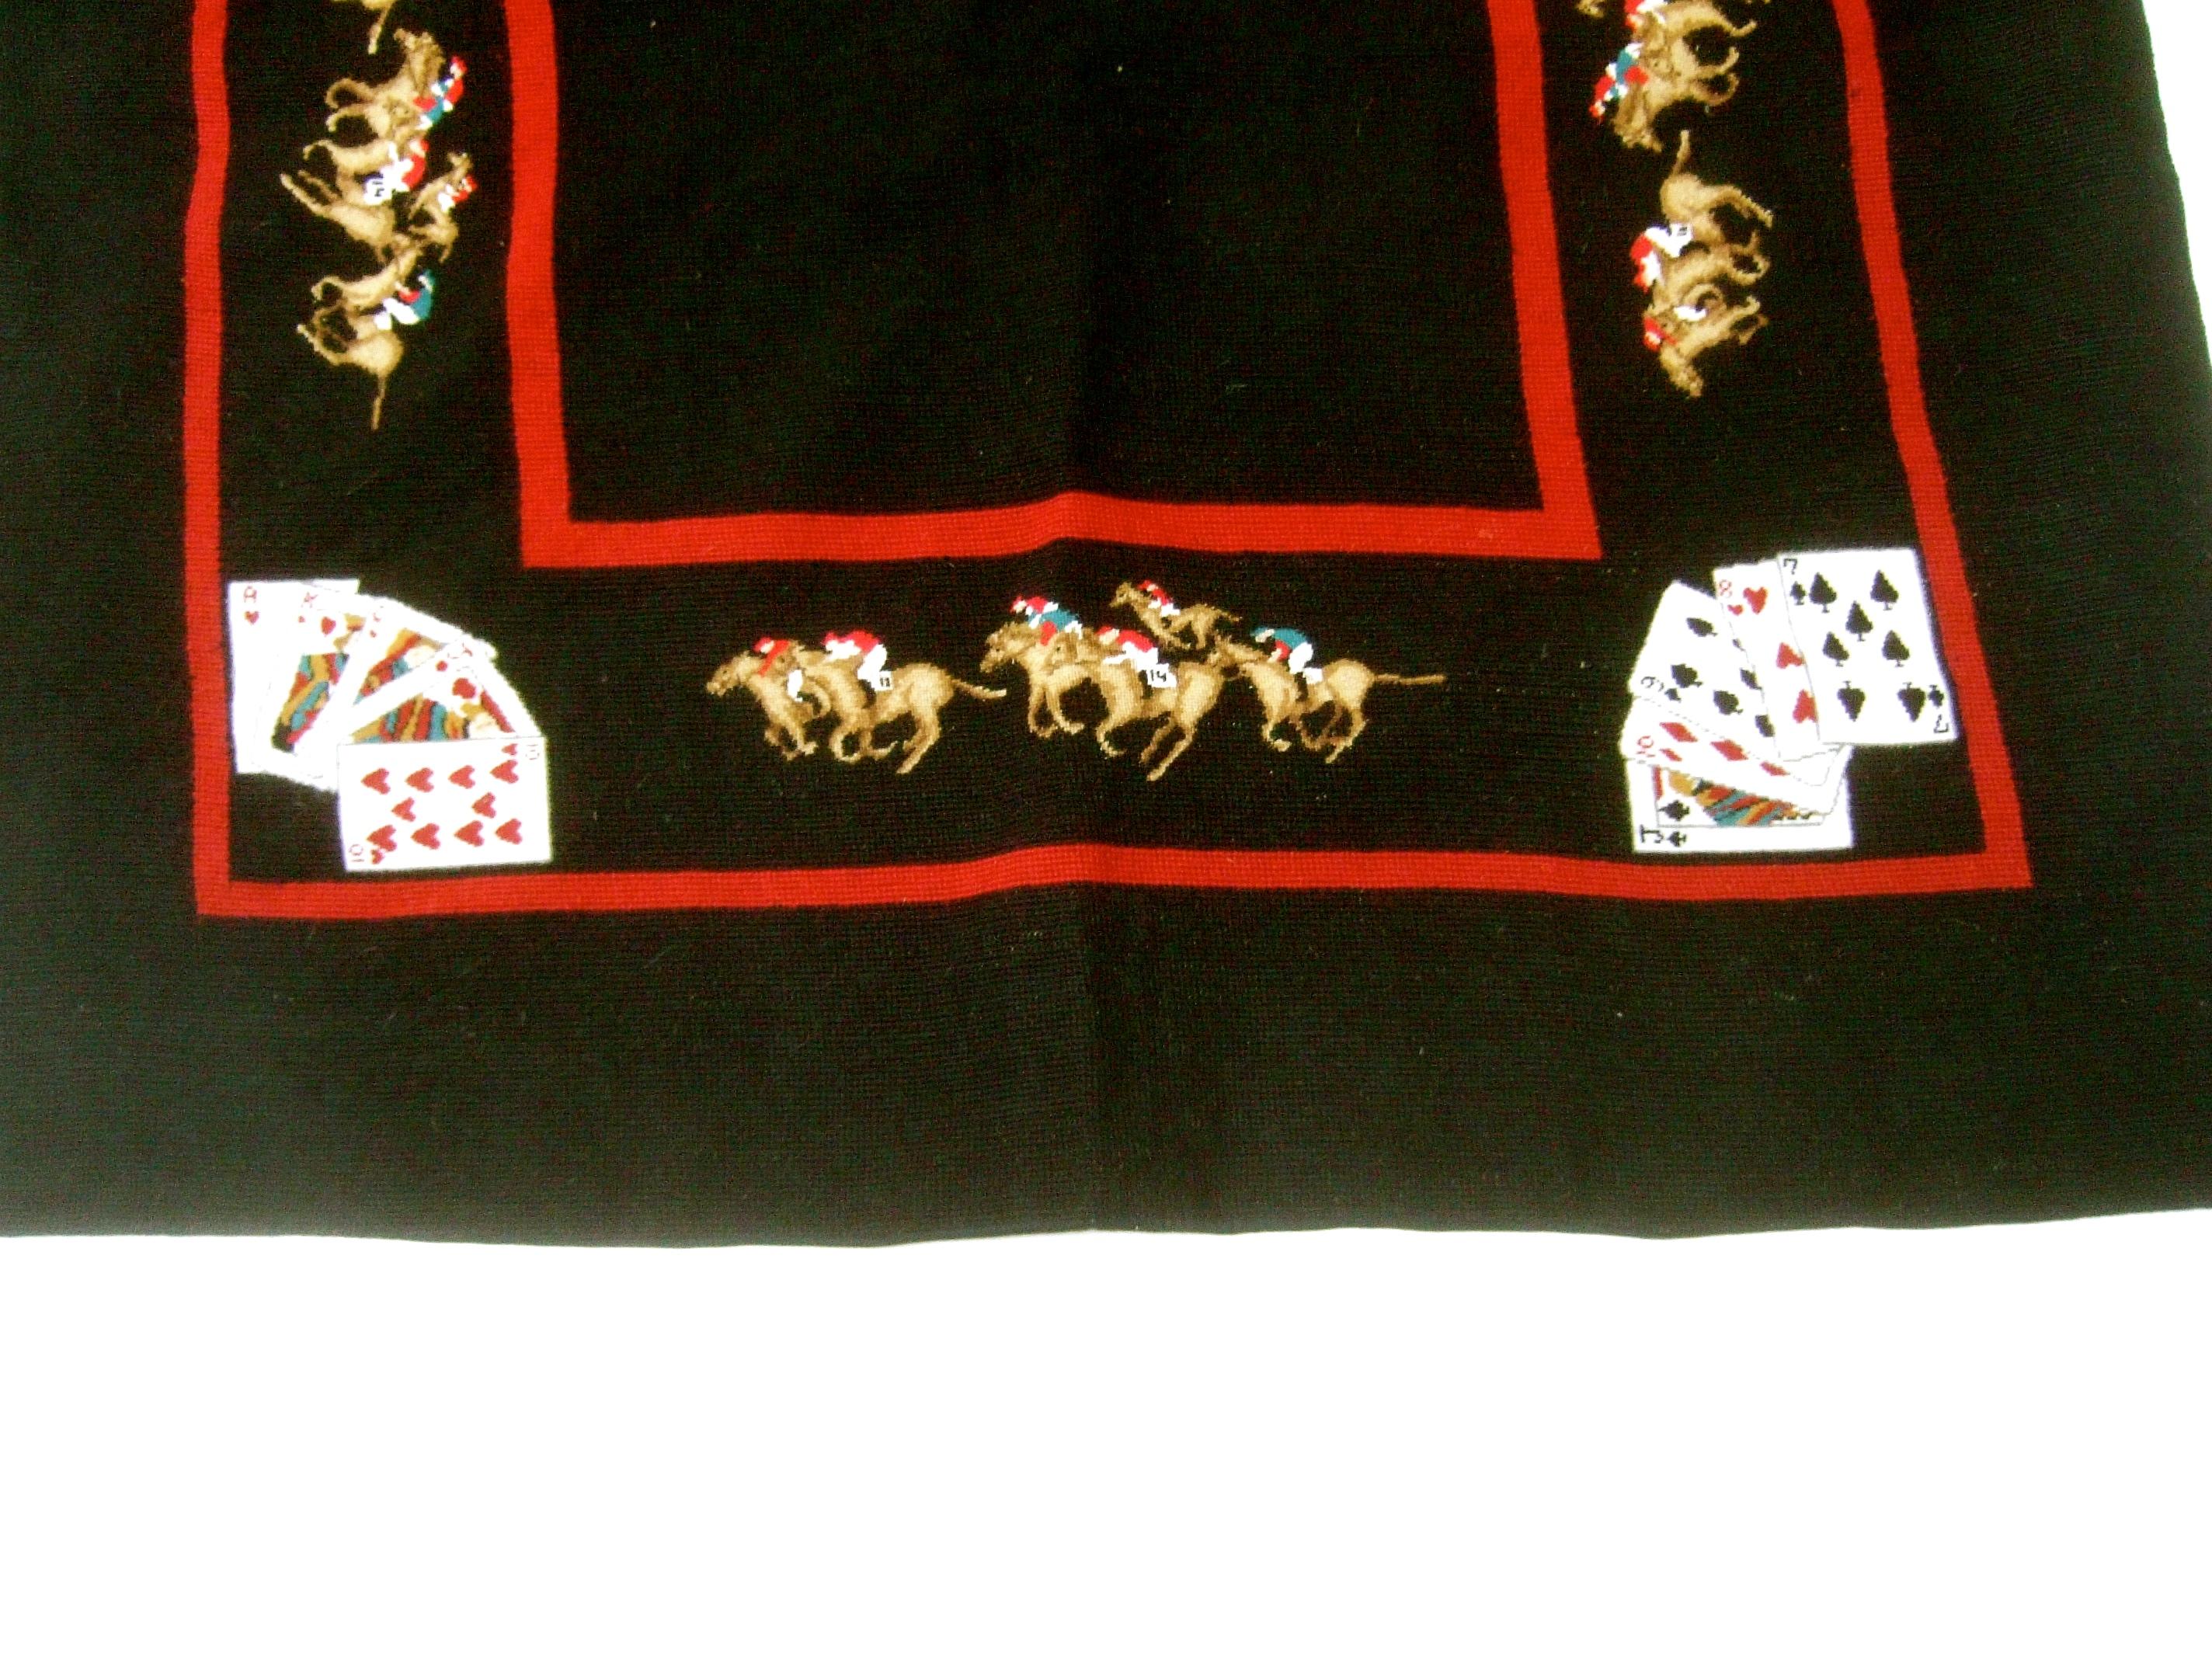 Exquisite Needlepoint Hand Stitched Bridge Equine Theme Table Cover circa 1980s 1